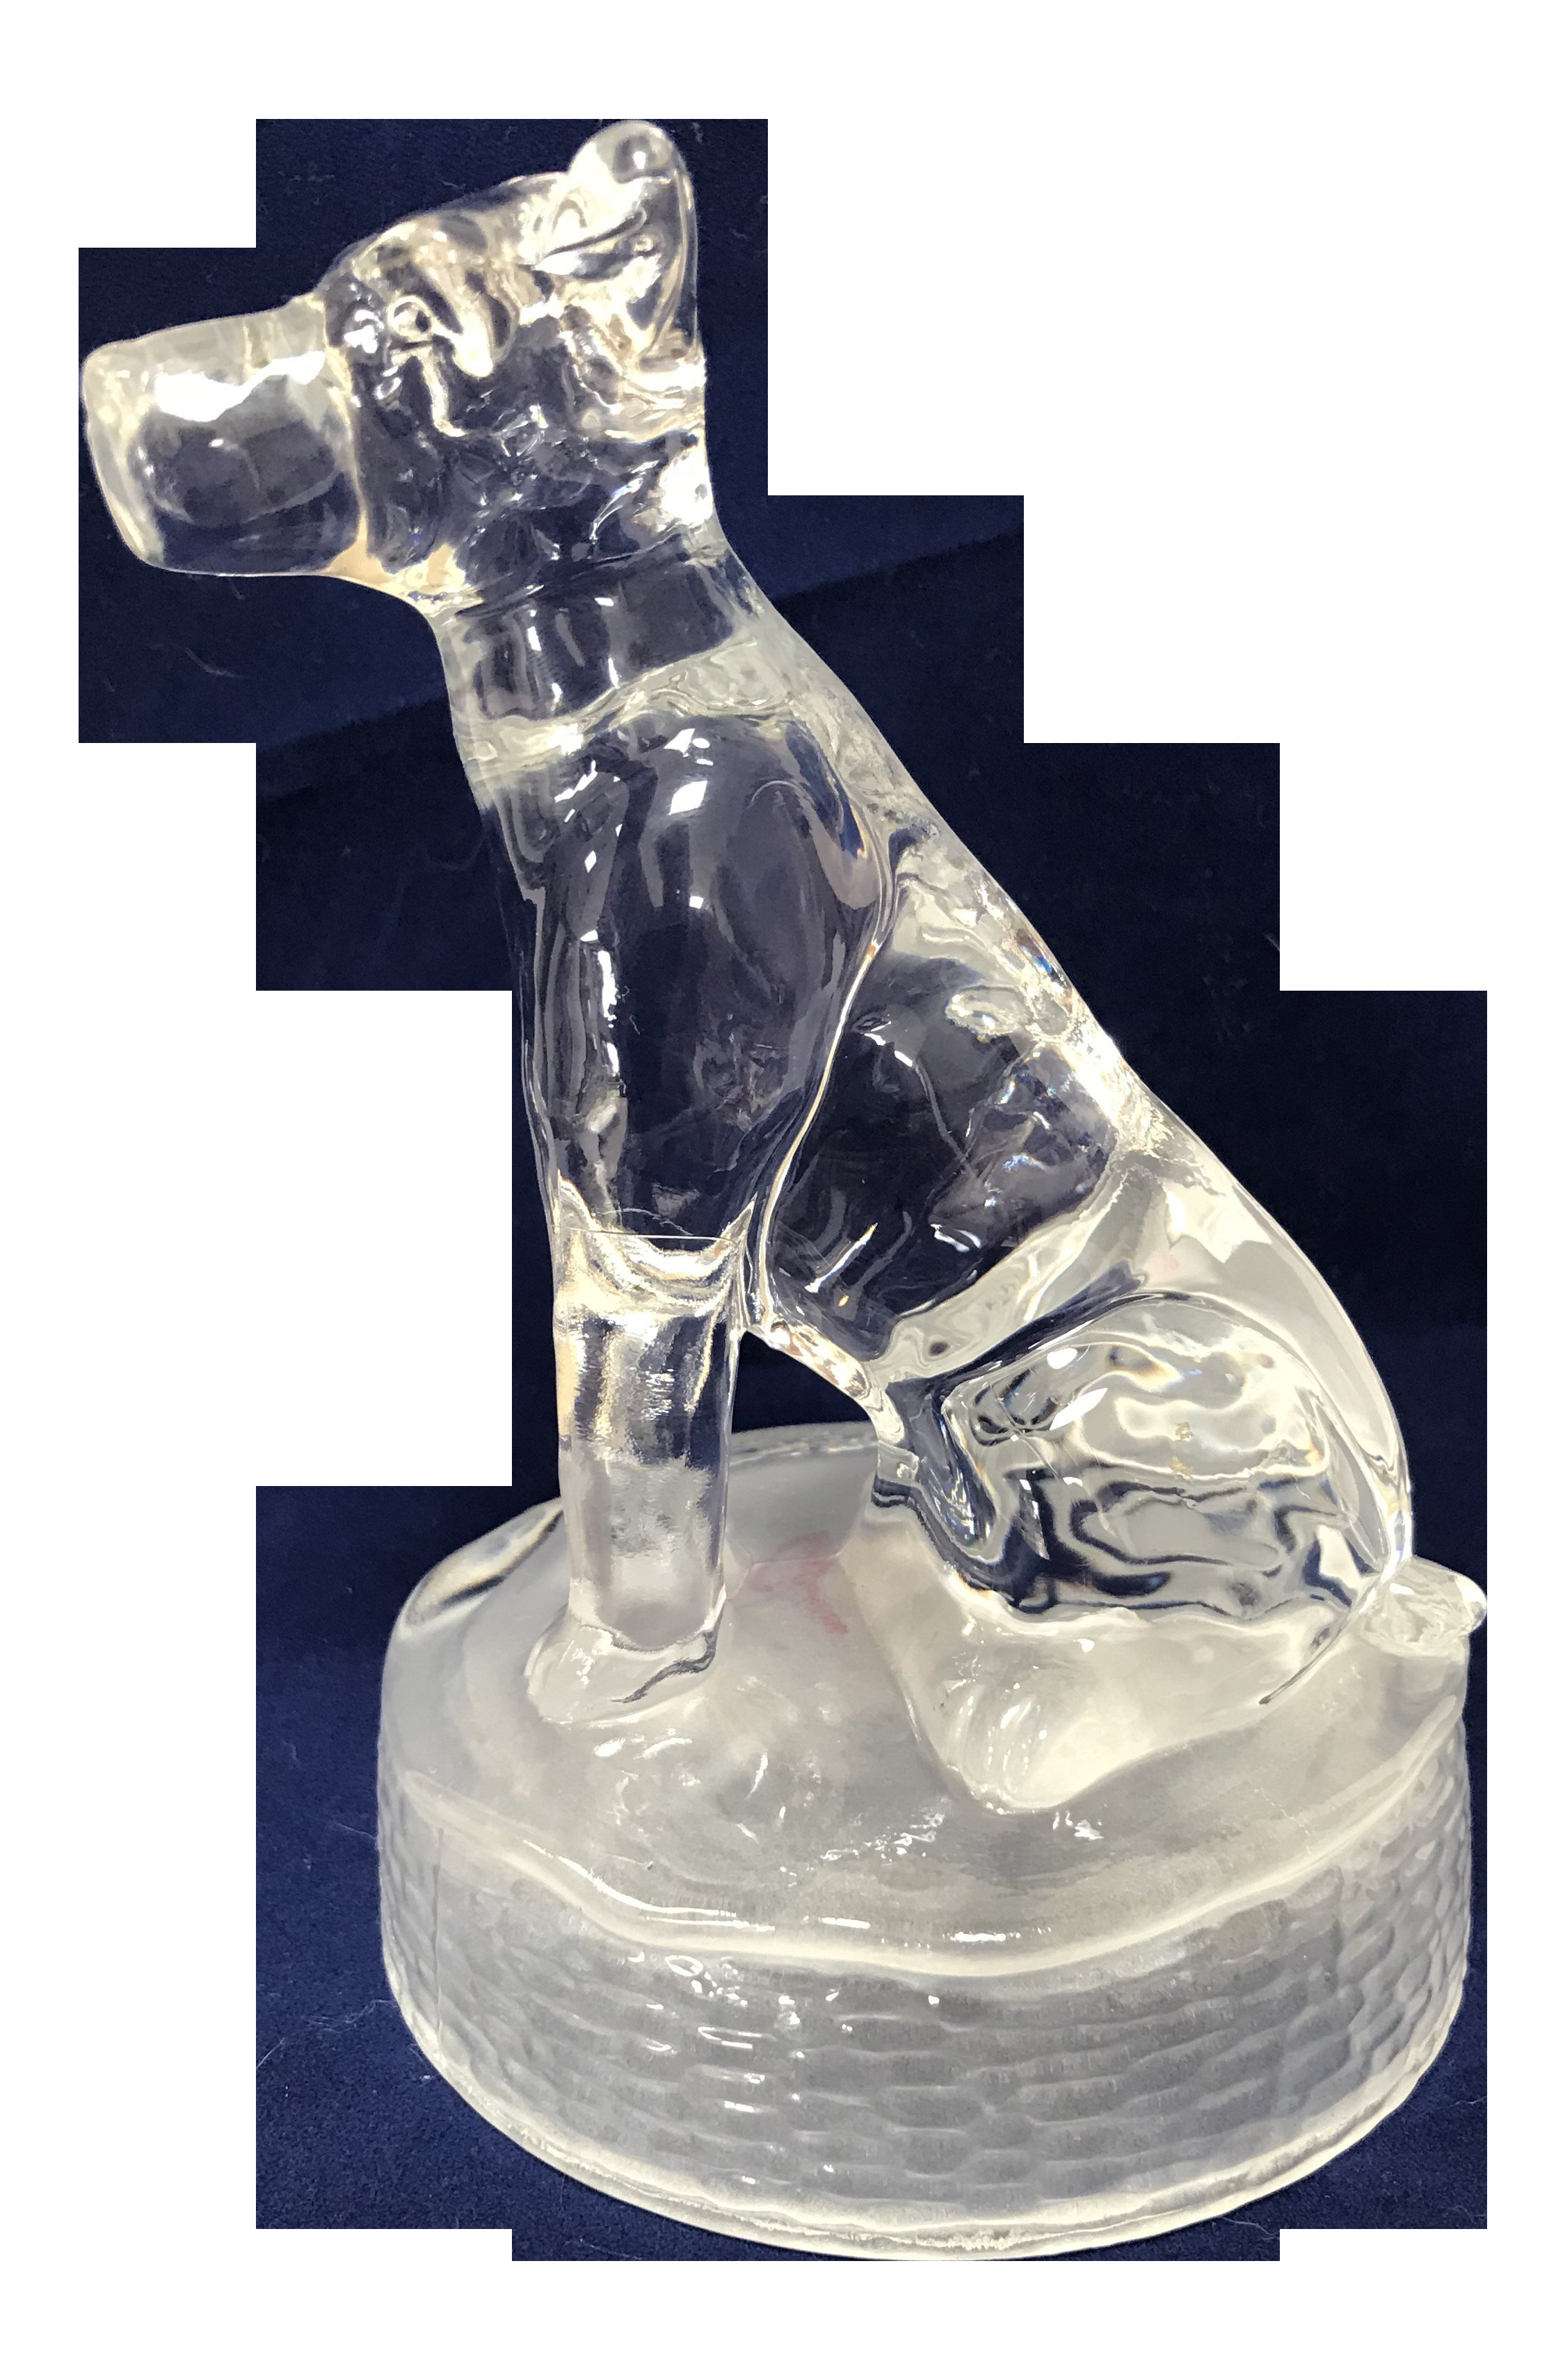 21 Awesome Cristal D Arques Vase 2024 free download cristal d arques vase of vintage cristal darques lead crystal glass dog figurine on frosted pertaining to vintage cristal darques lead crystal glass dog figurine on frosted pedestal paperwei